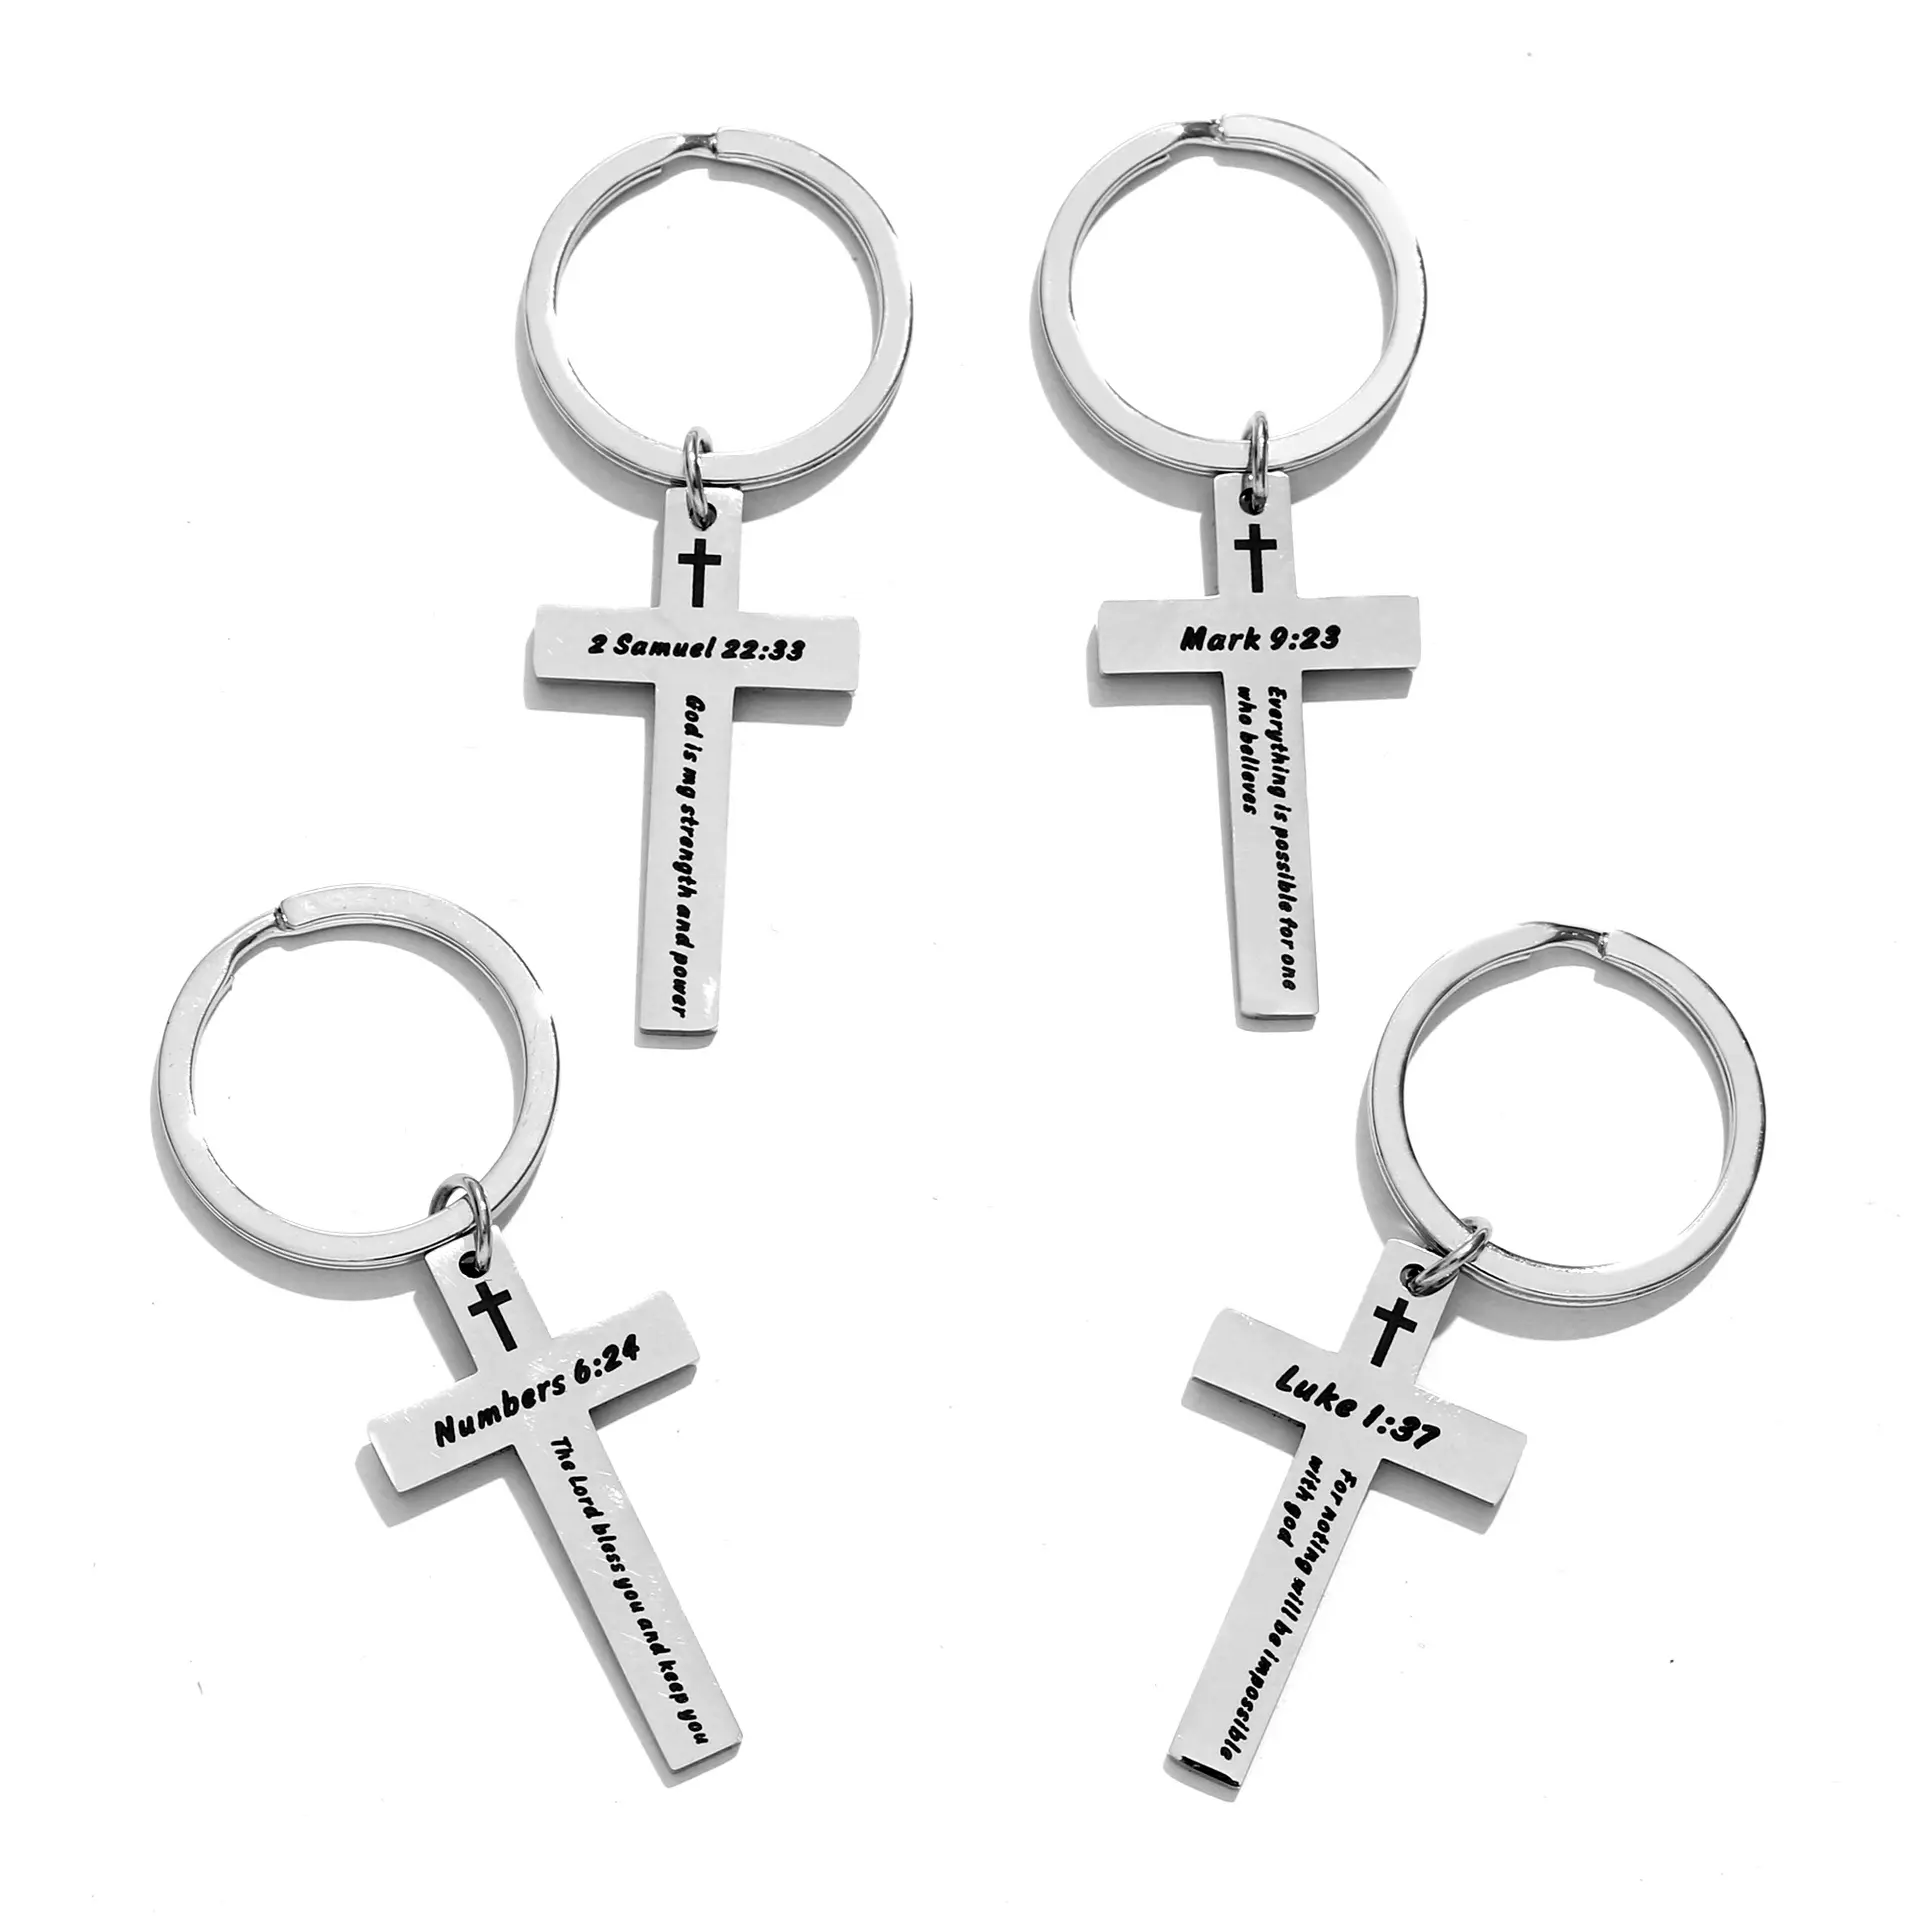 Christian Gifts for Women Men Cross metal Key chains Inspirational Bible Verse Religious Key Rings Bible Verse Keychain Jewelry